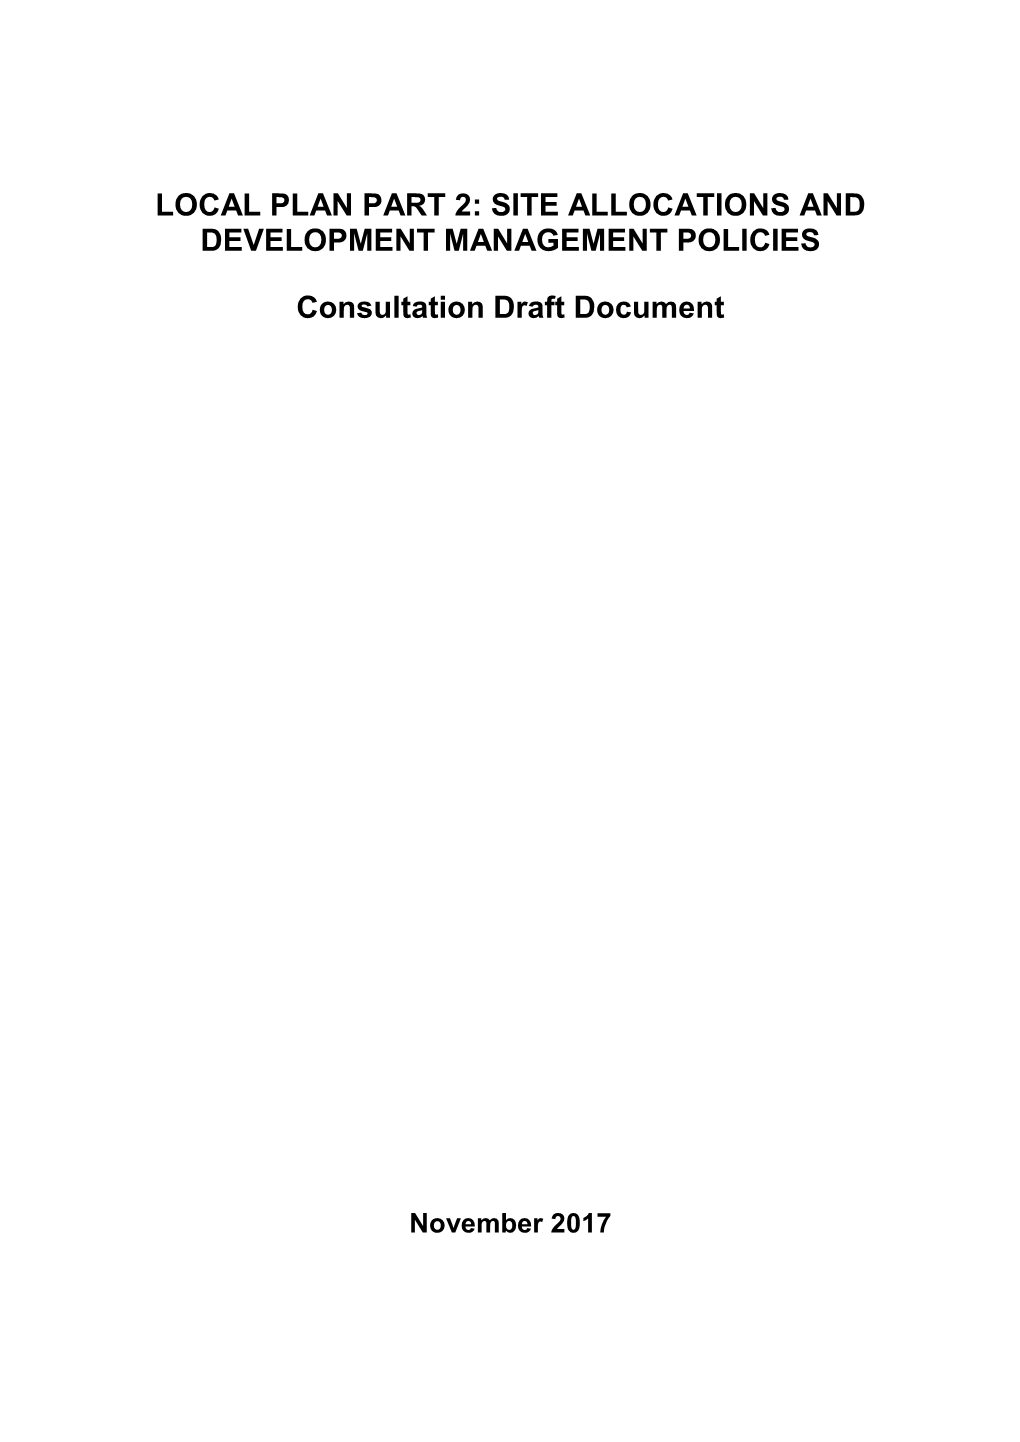 Local Plan Part 2: Site Allocations and Development Management Policies